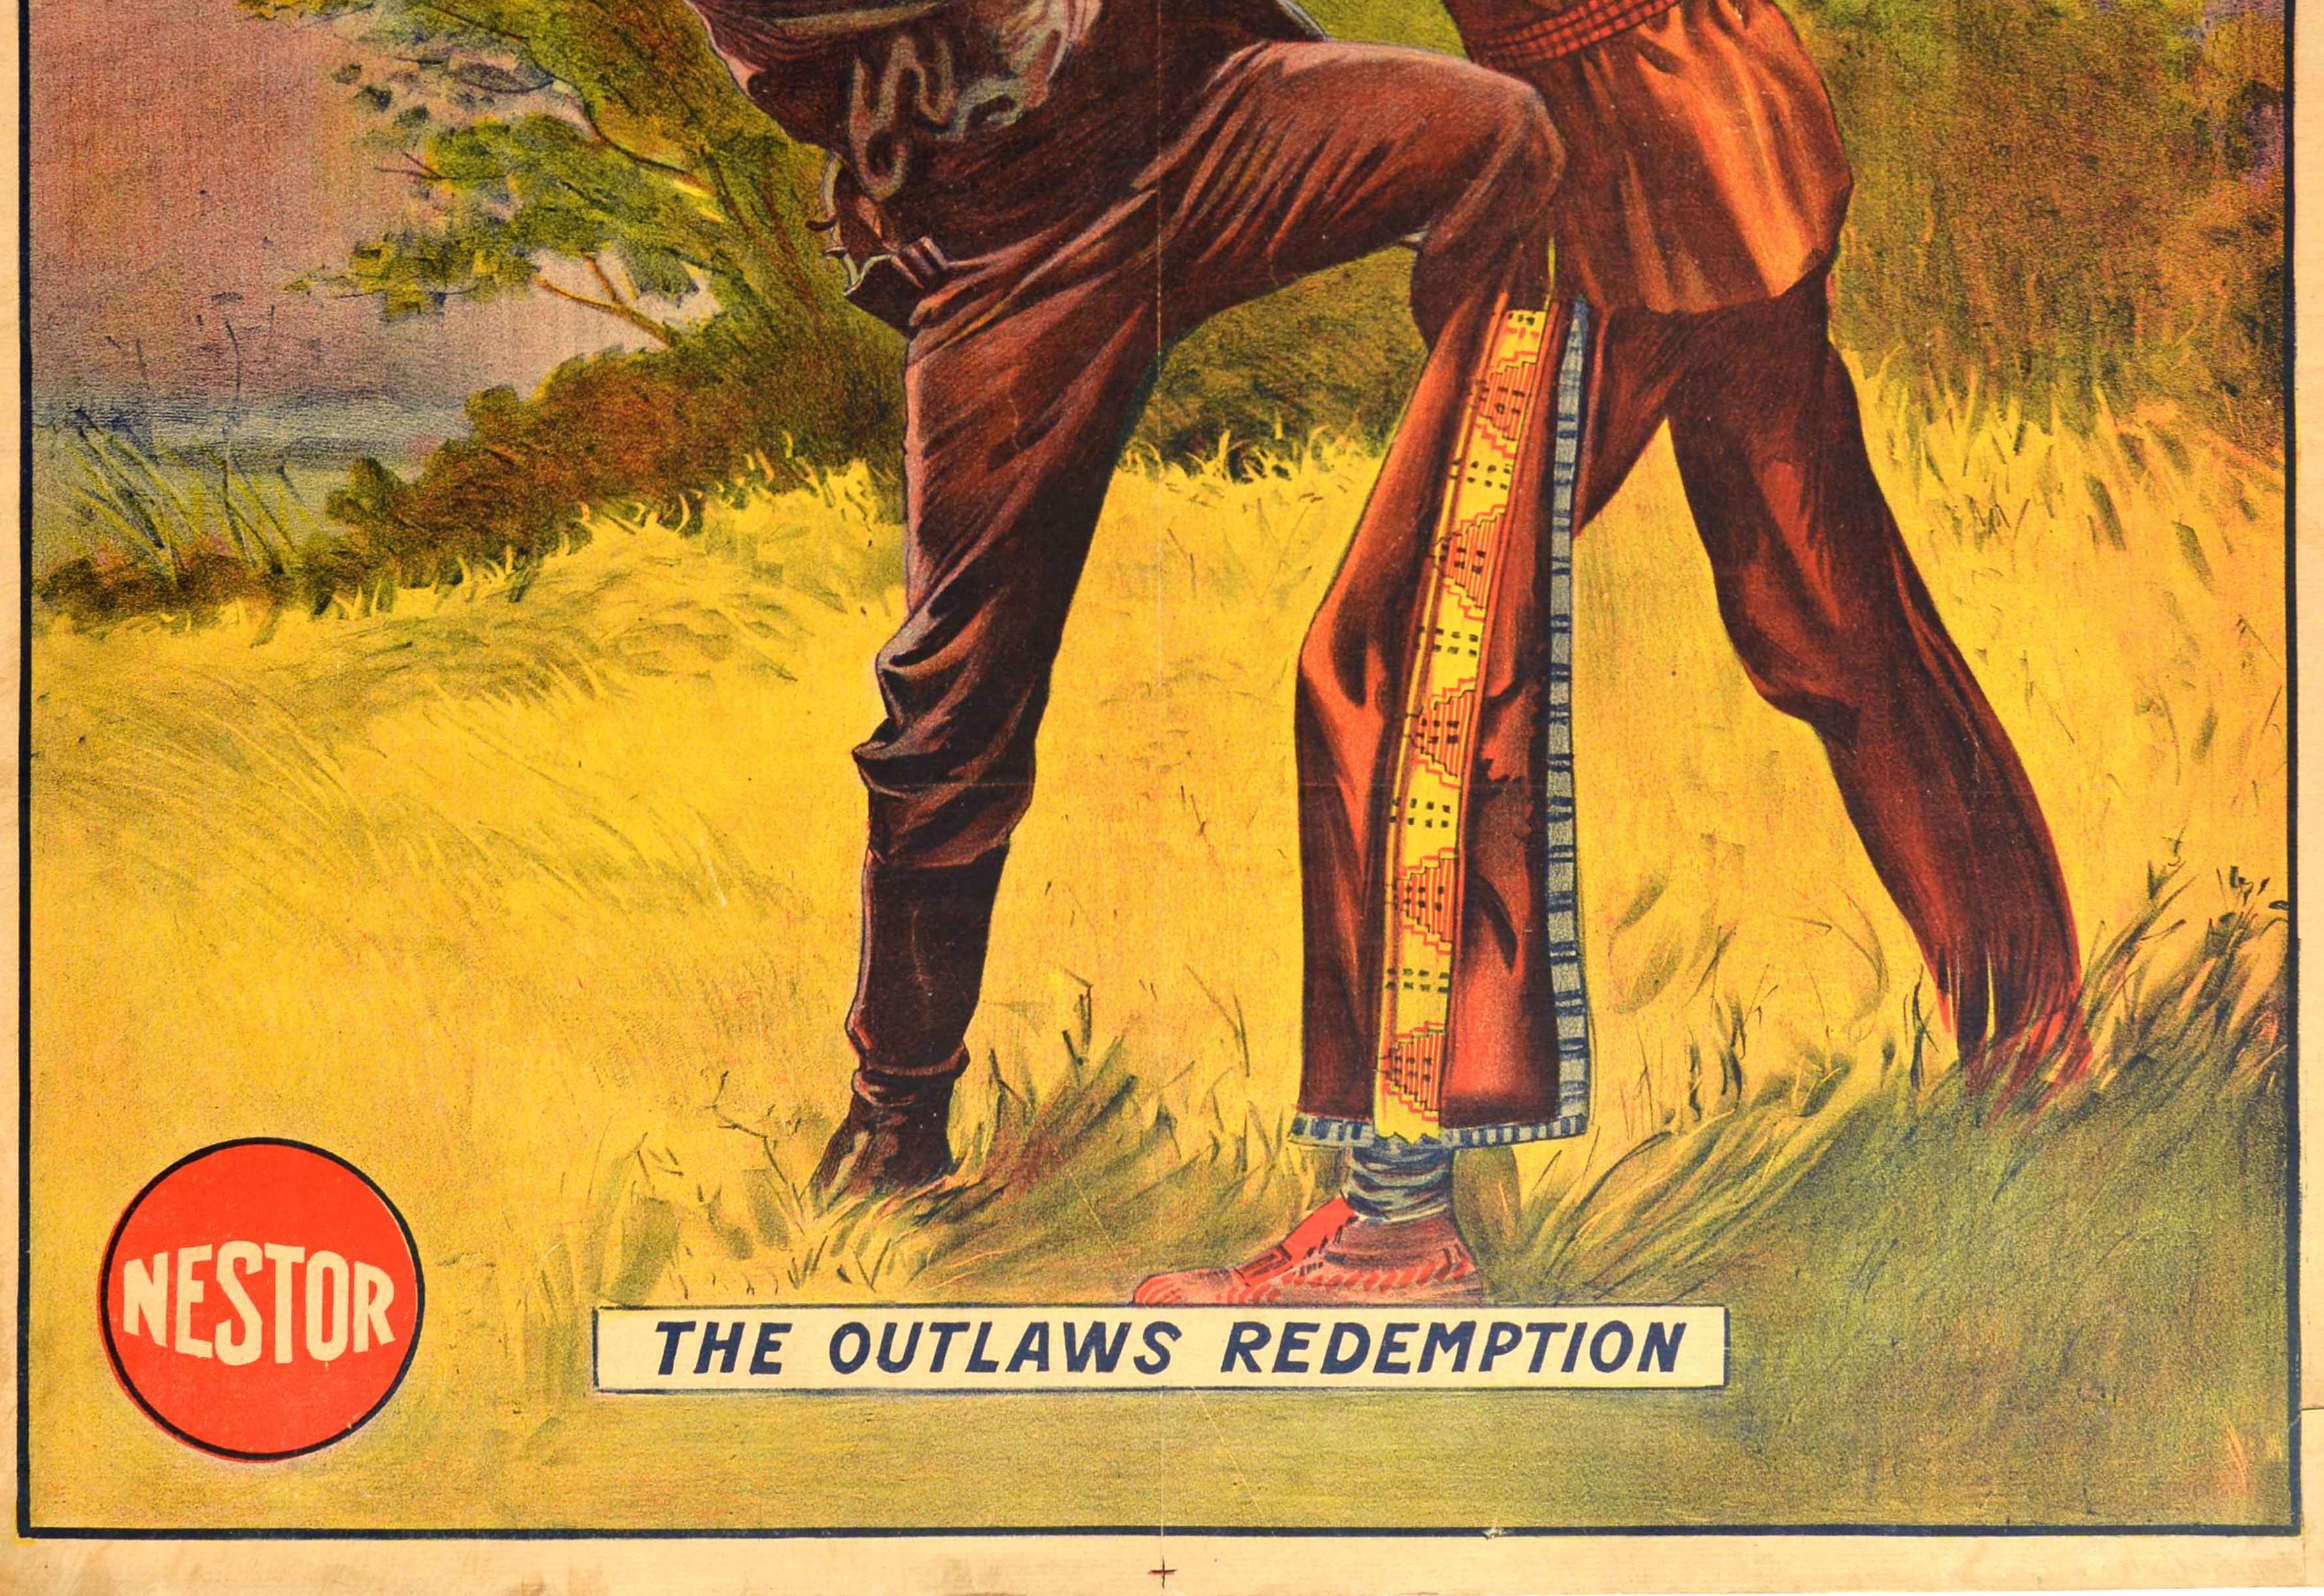 American Original Antique Wild Western Film Poster The Gunfighter The Outlaws Redemption